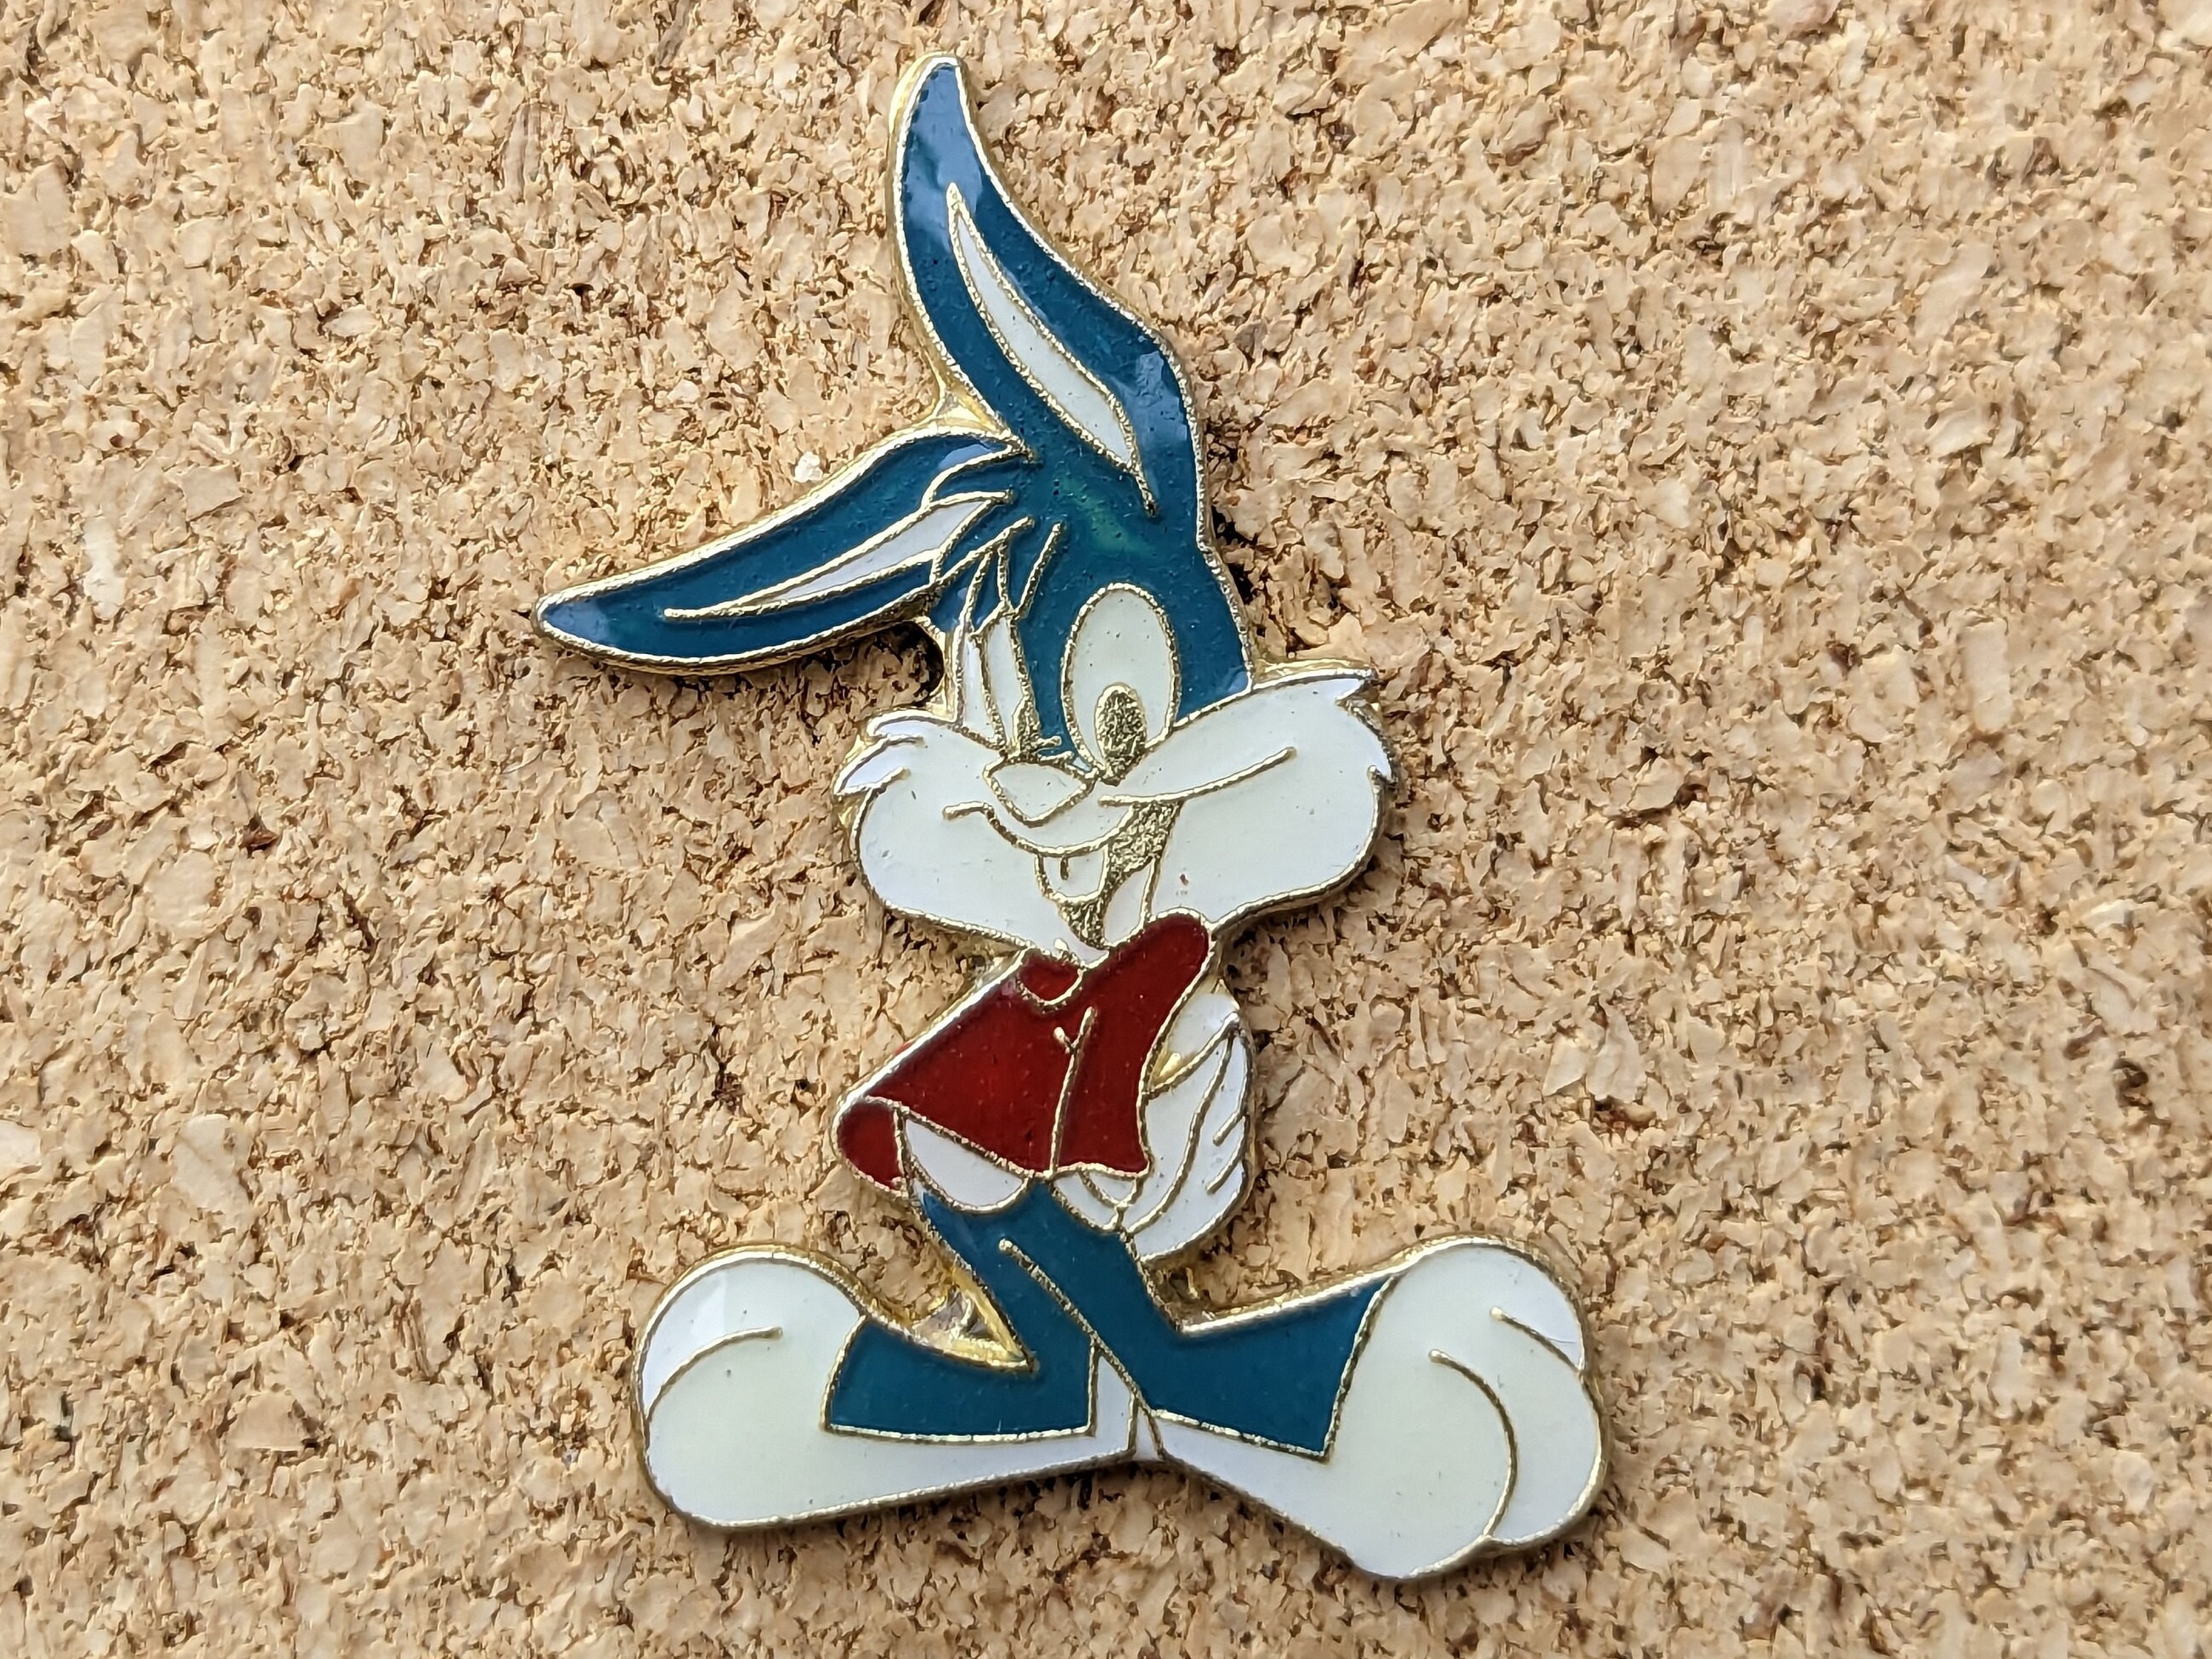 70s Antonio Guiseppe Looney Tunes Jacket w/ Taz and Bugs Bunny Embroidery 